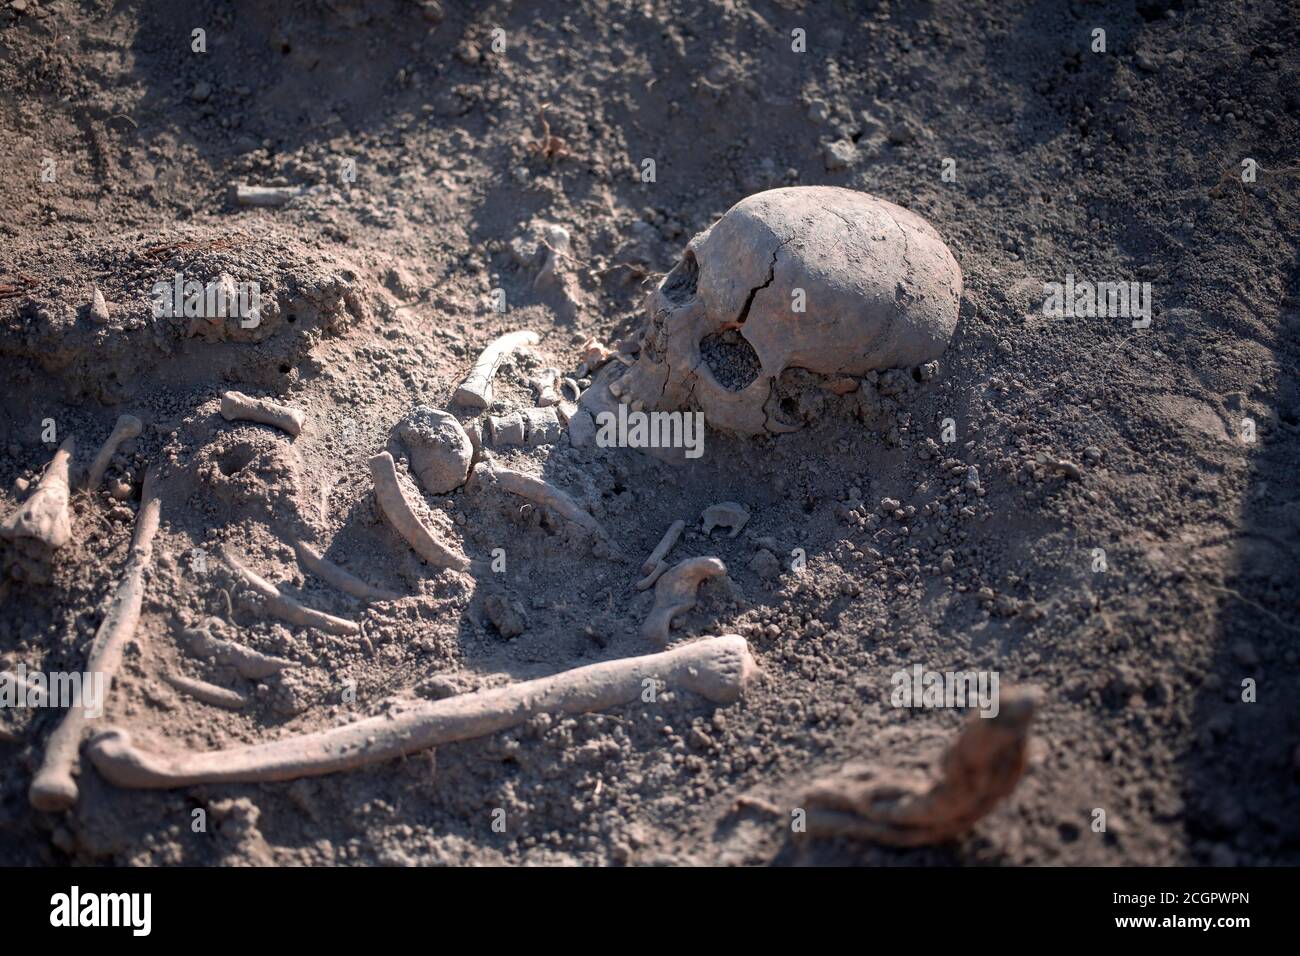 Serbia, September 27, 2019: Human remains from the Roman period discovered during archaeological excavations in Vinča Stock Photo